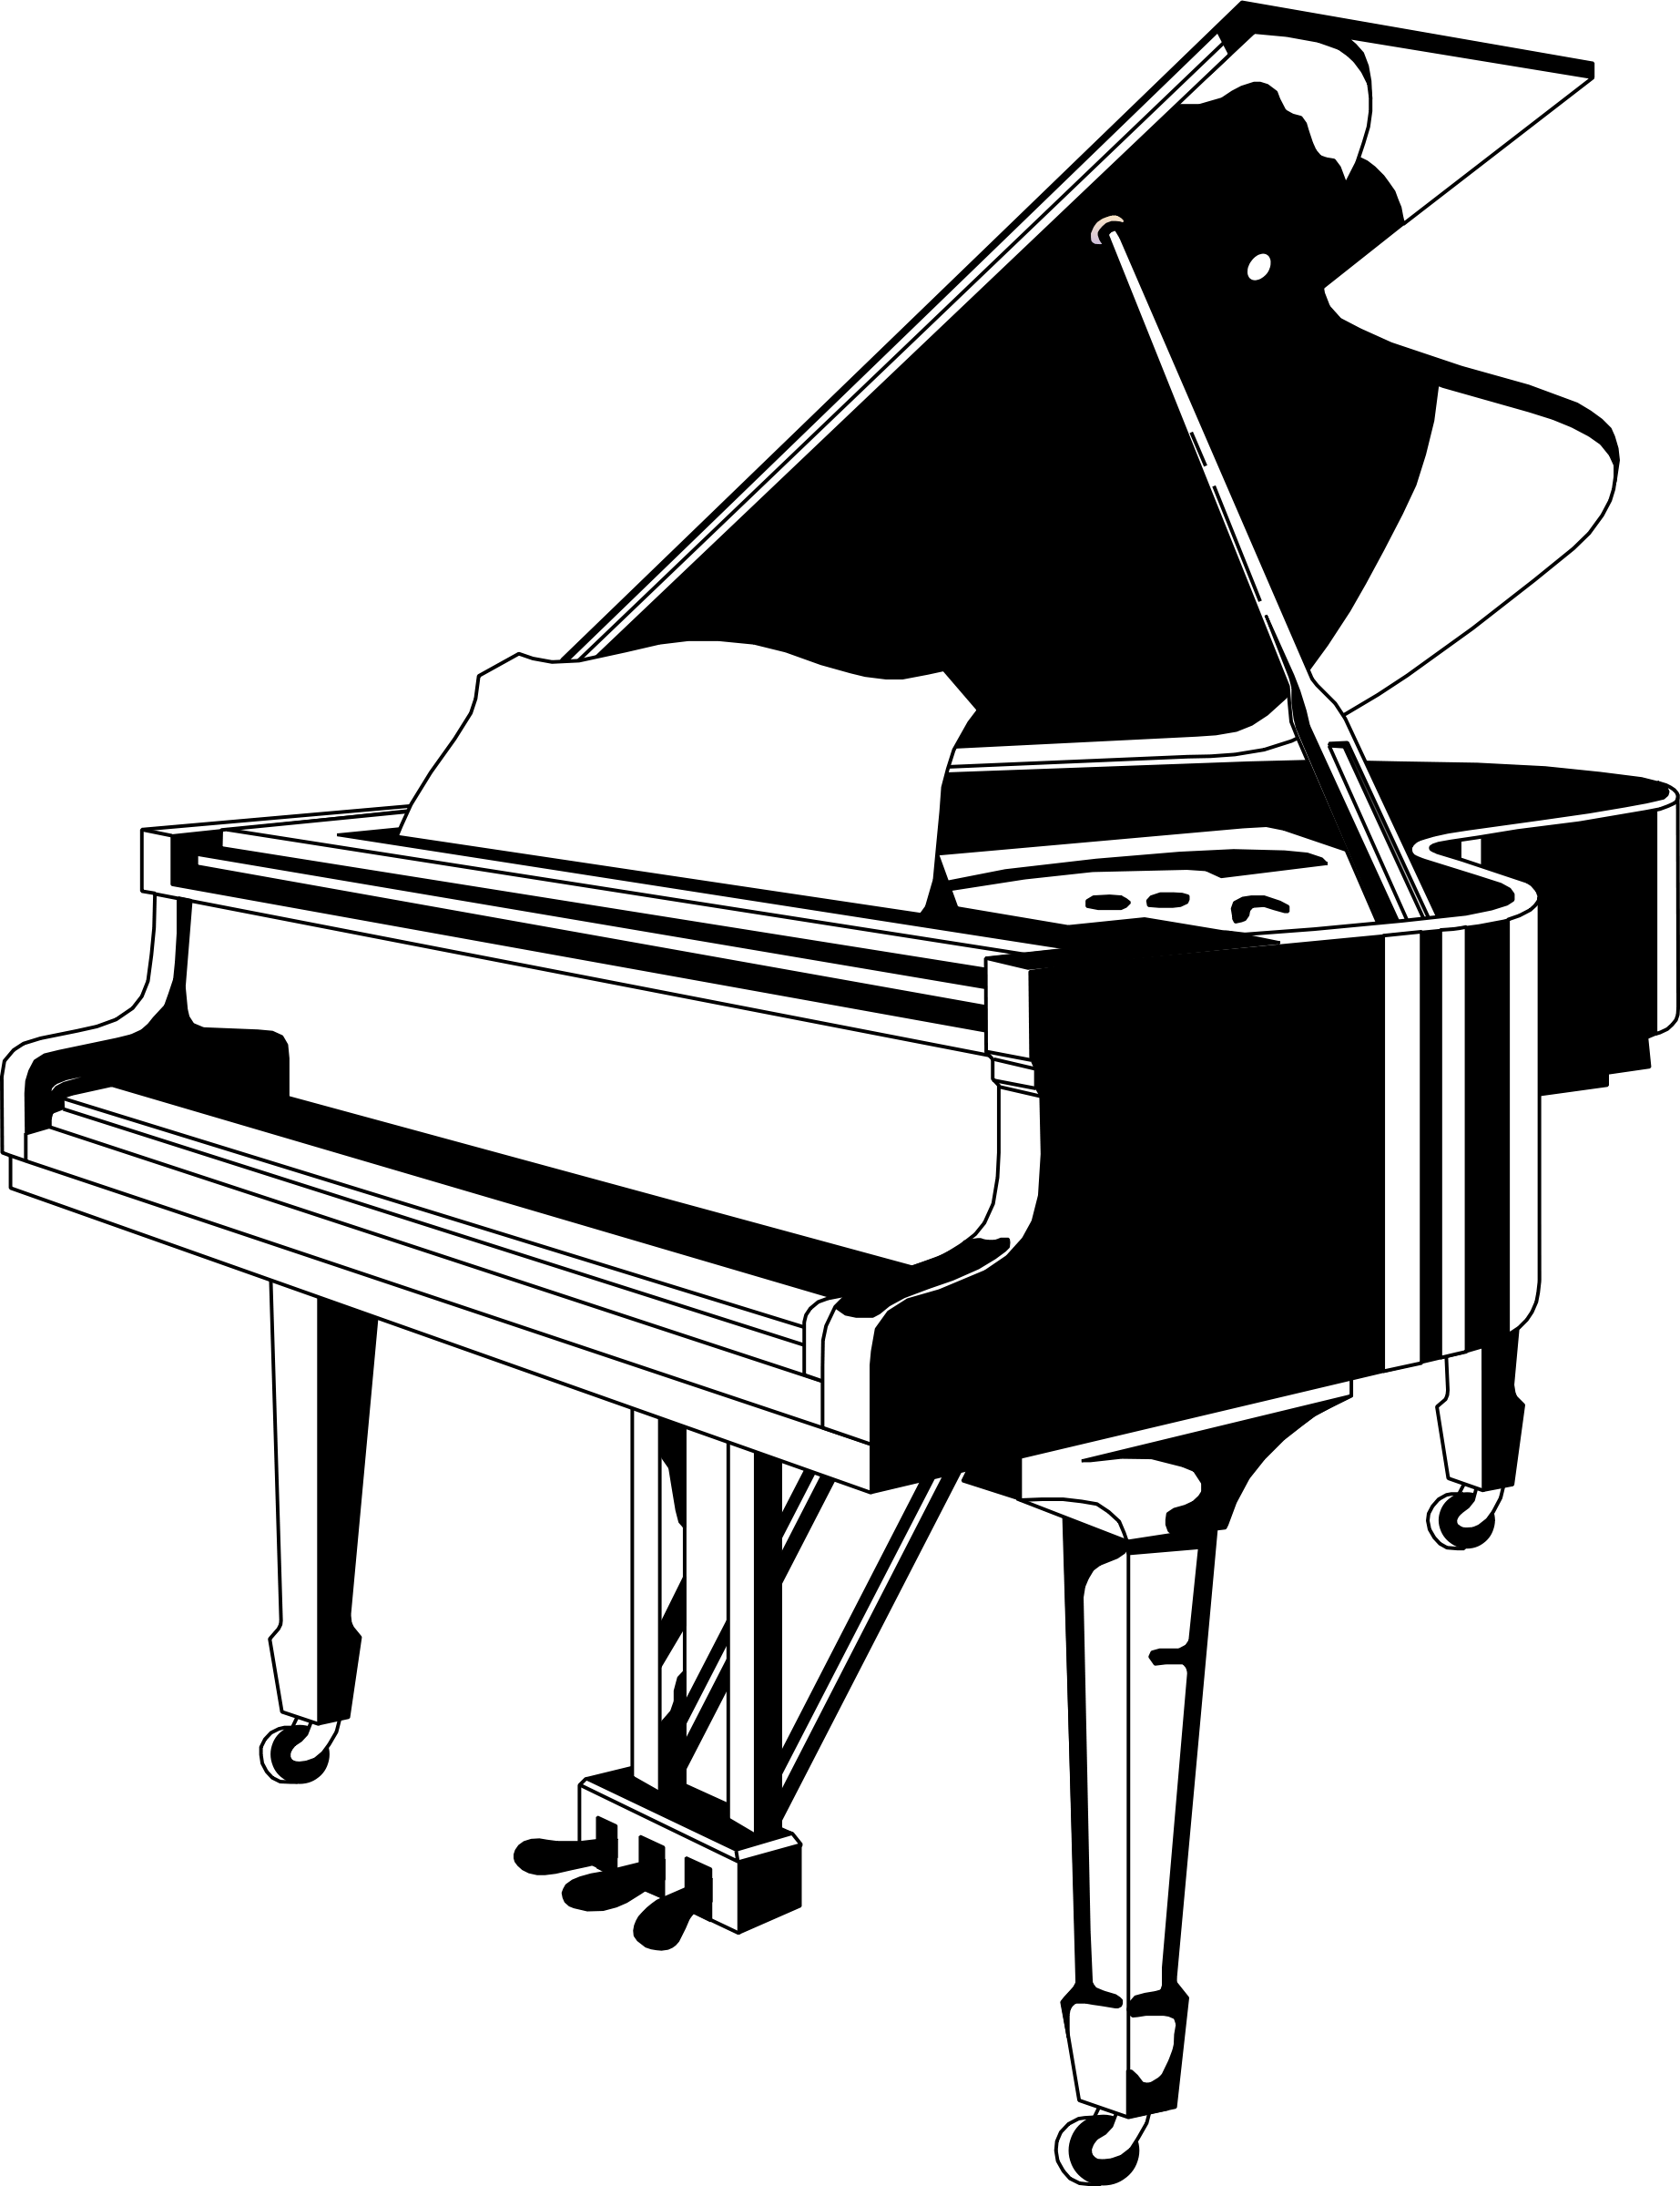 Hands clipart piano. Black and white musical